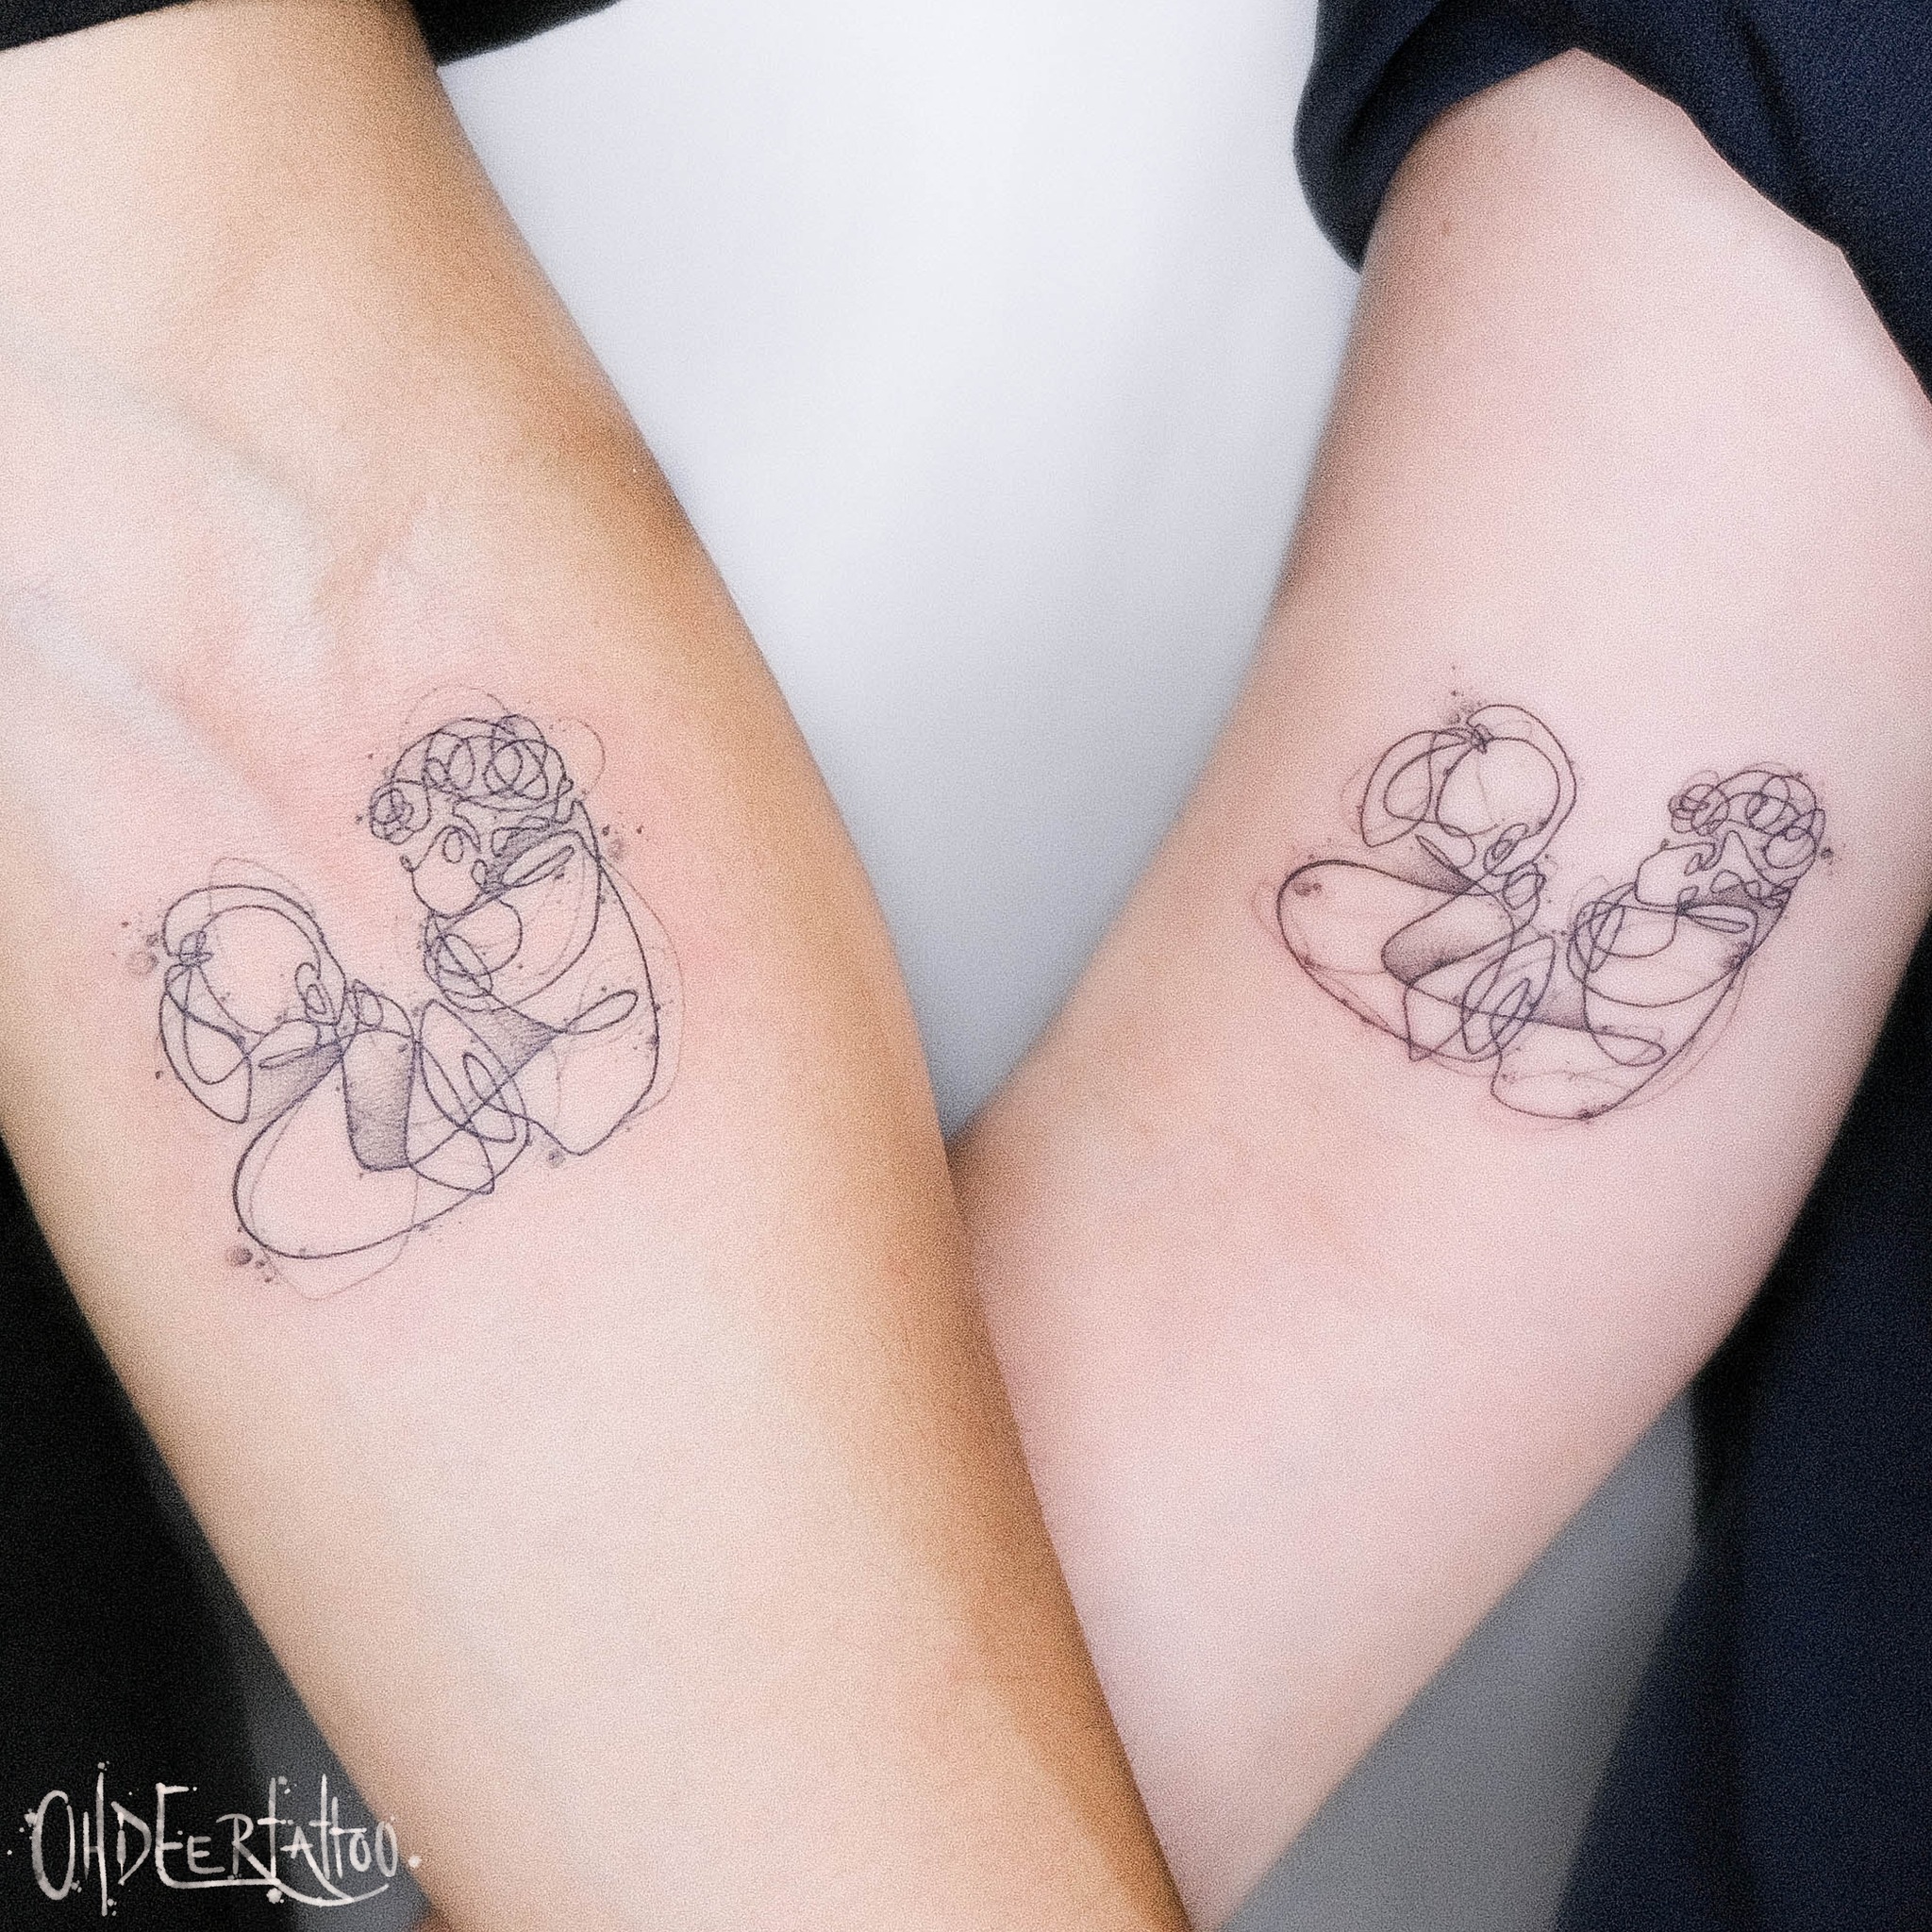 7 couple tattoo ideas to get with your partner